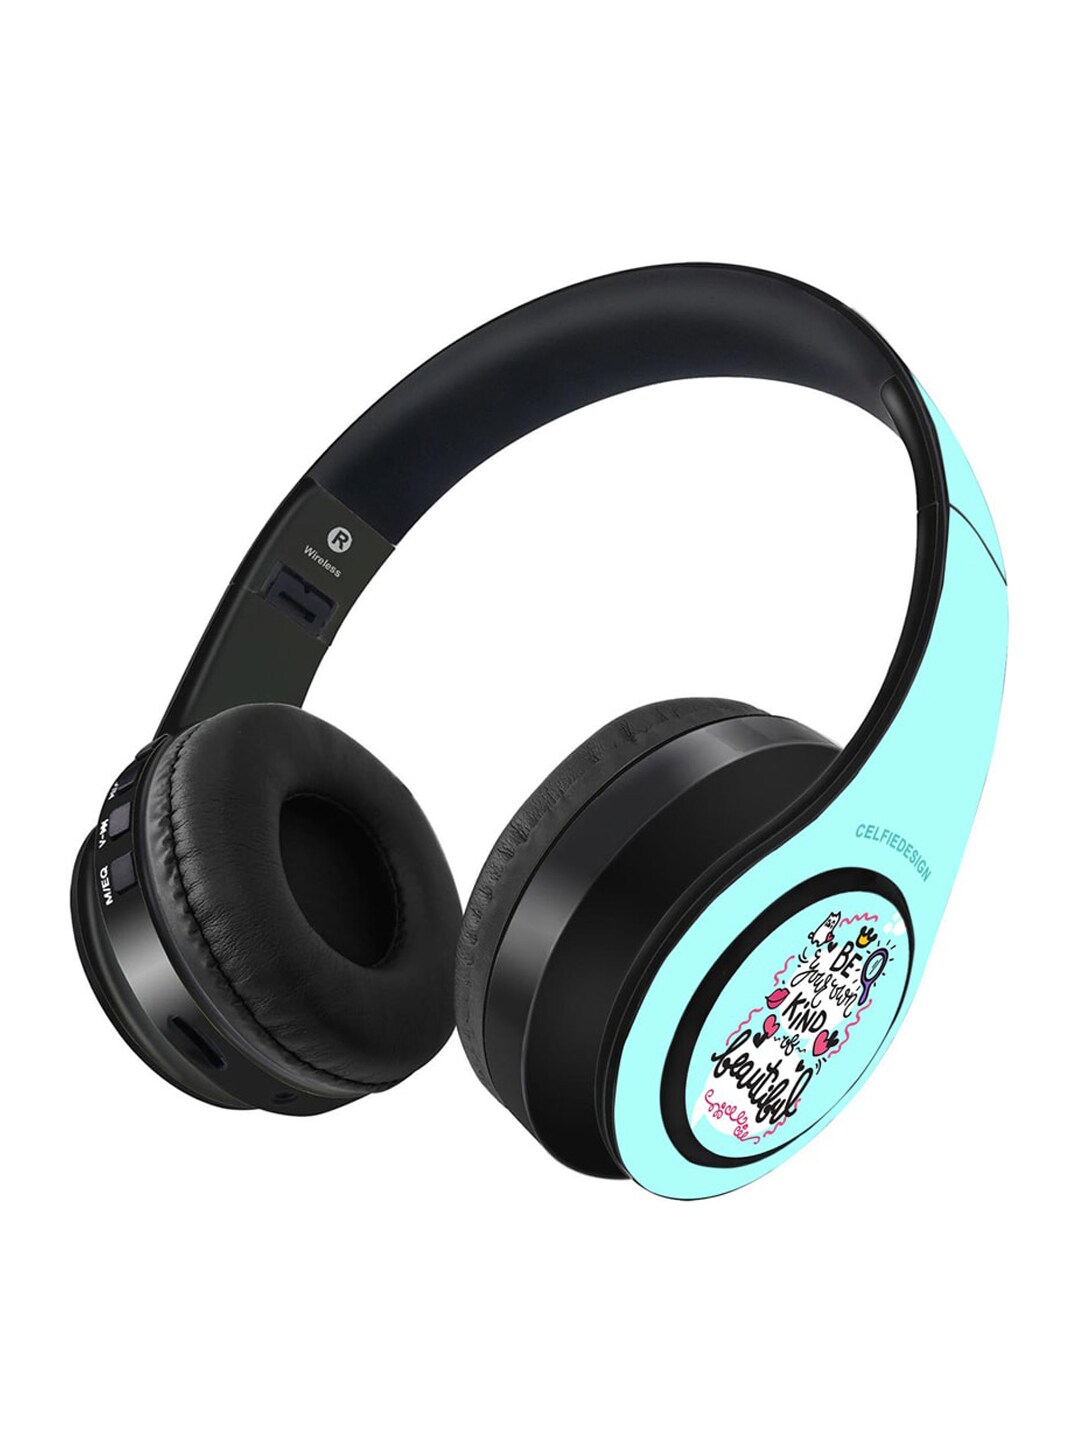 CelfieDesign Black Be Your Own Kind Of Beautiful Bluetooth On Ear Headphones with Mic Price in India